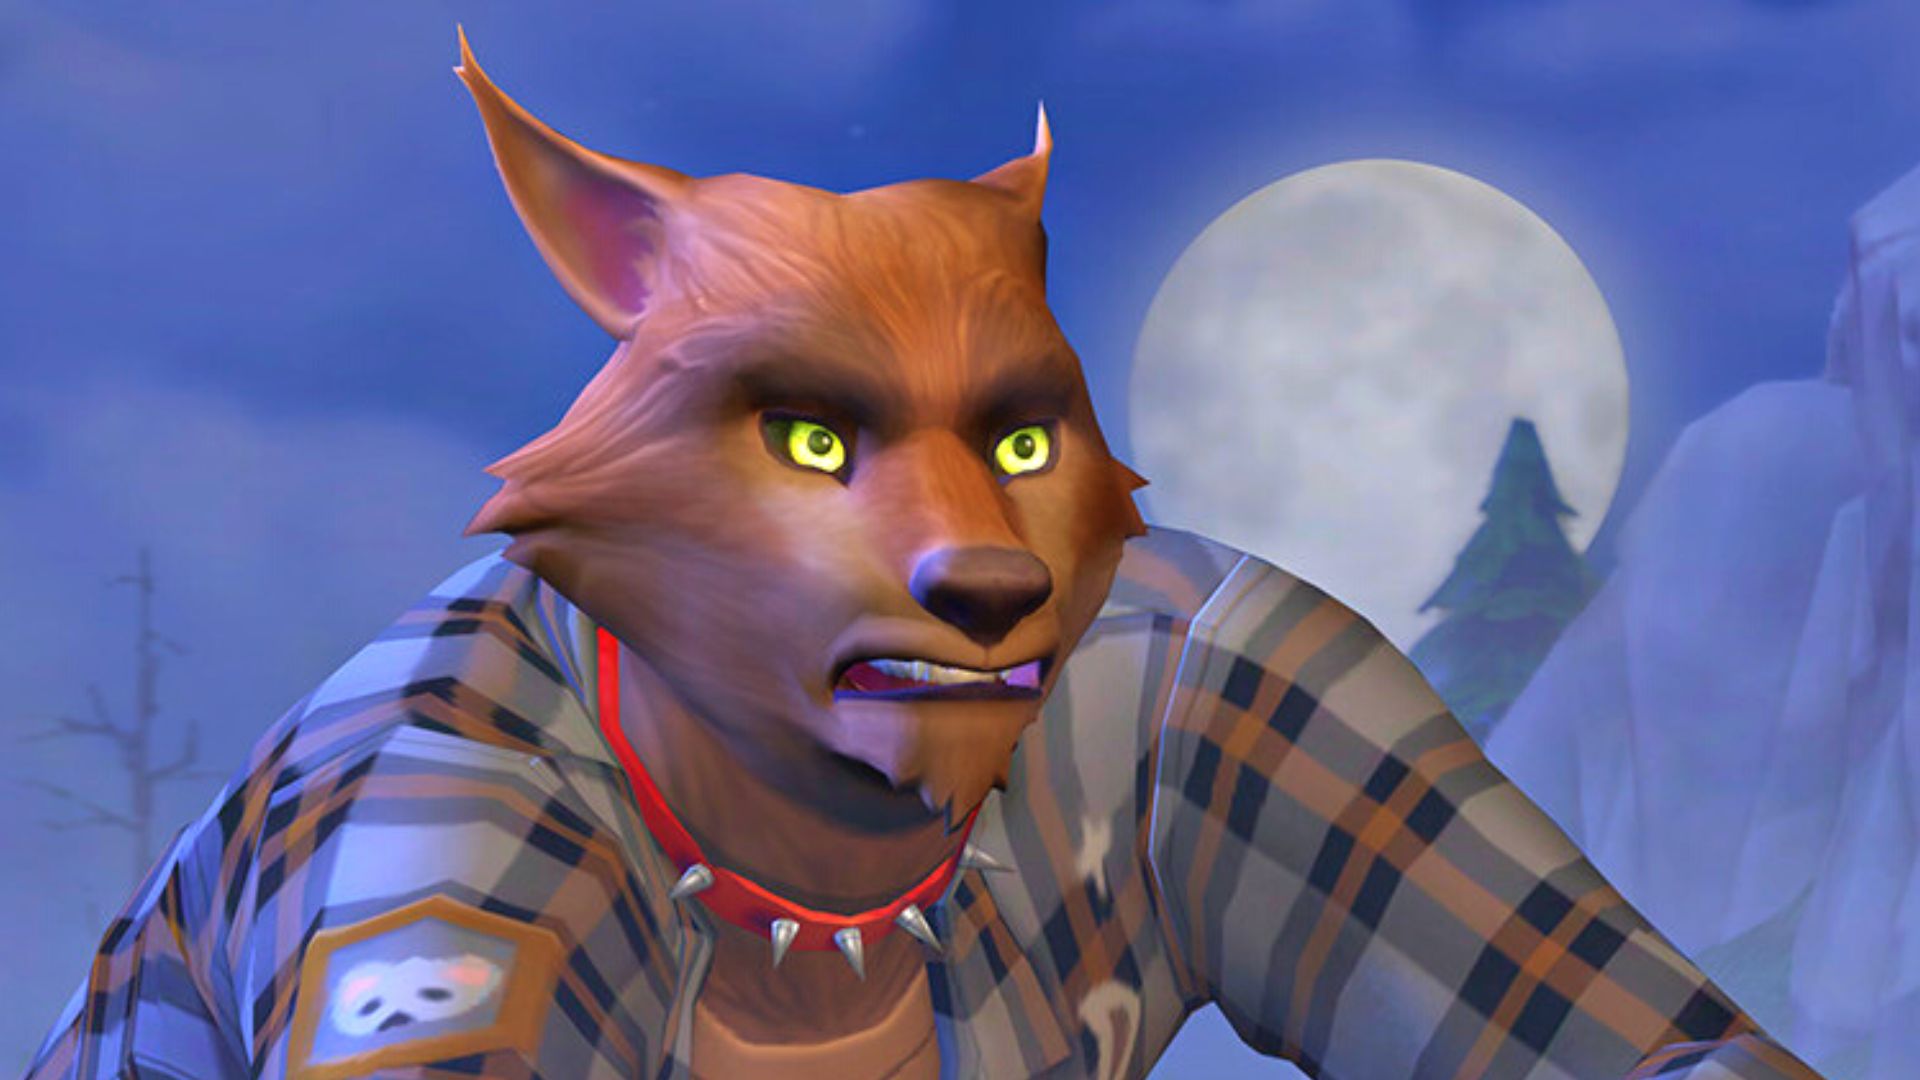 Sims 4 Werewolves now more picky in love and won’t eat whiteboards